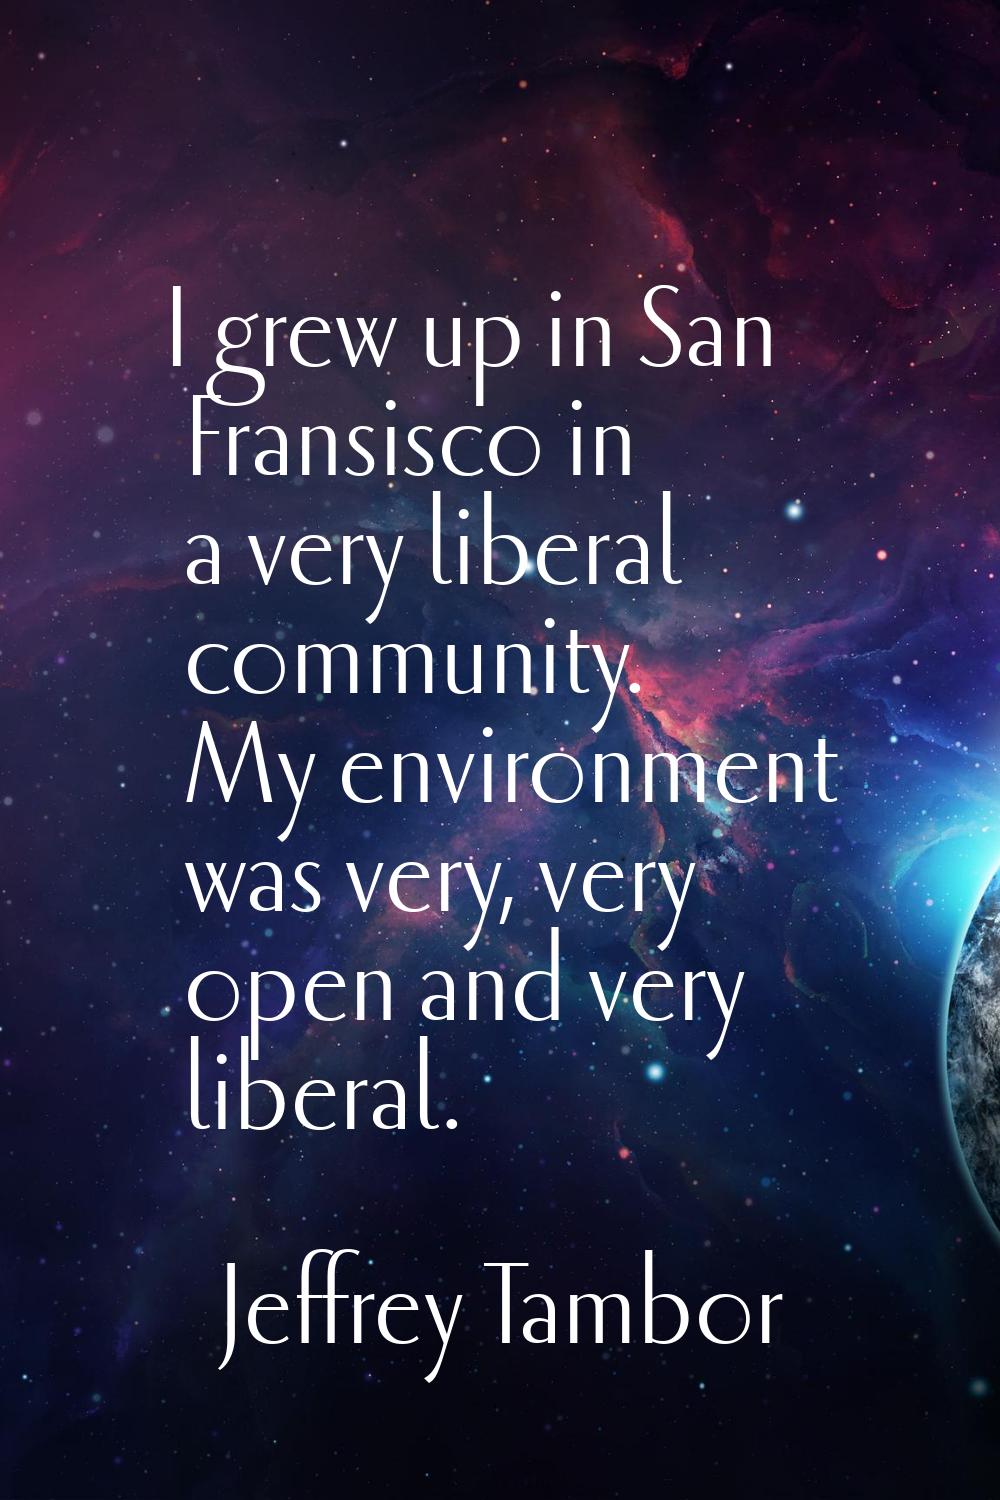 I grew up in San Fransisco in a very liberal community. My environment was very, very open and very